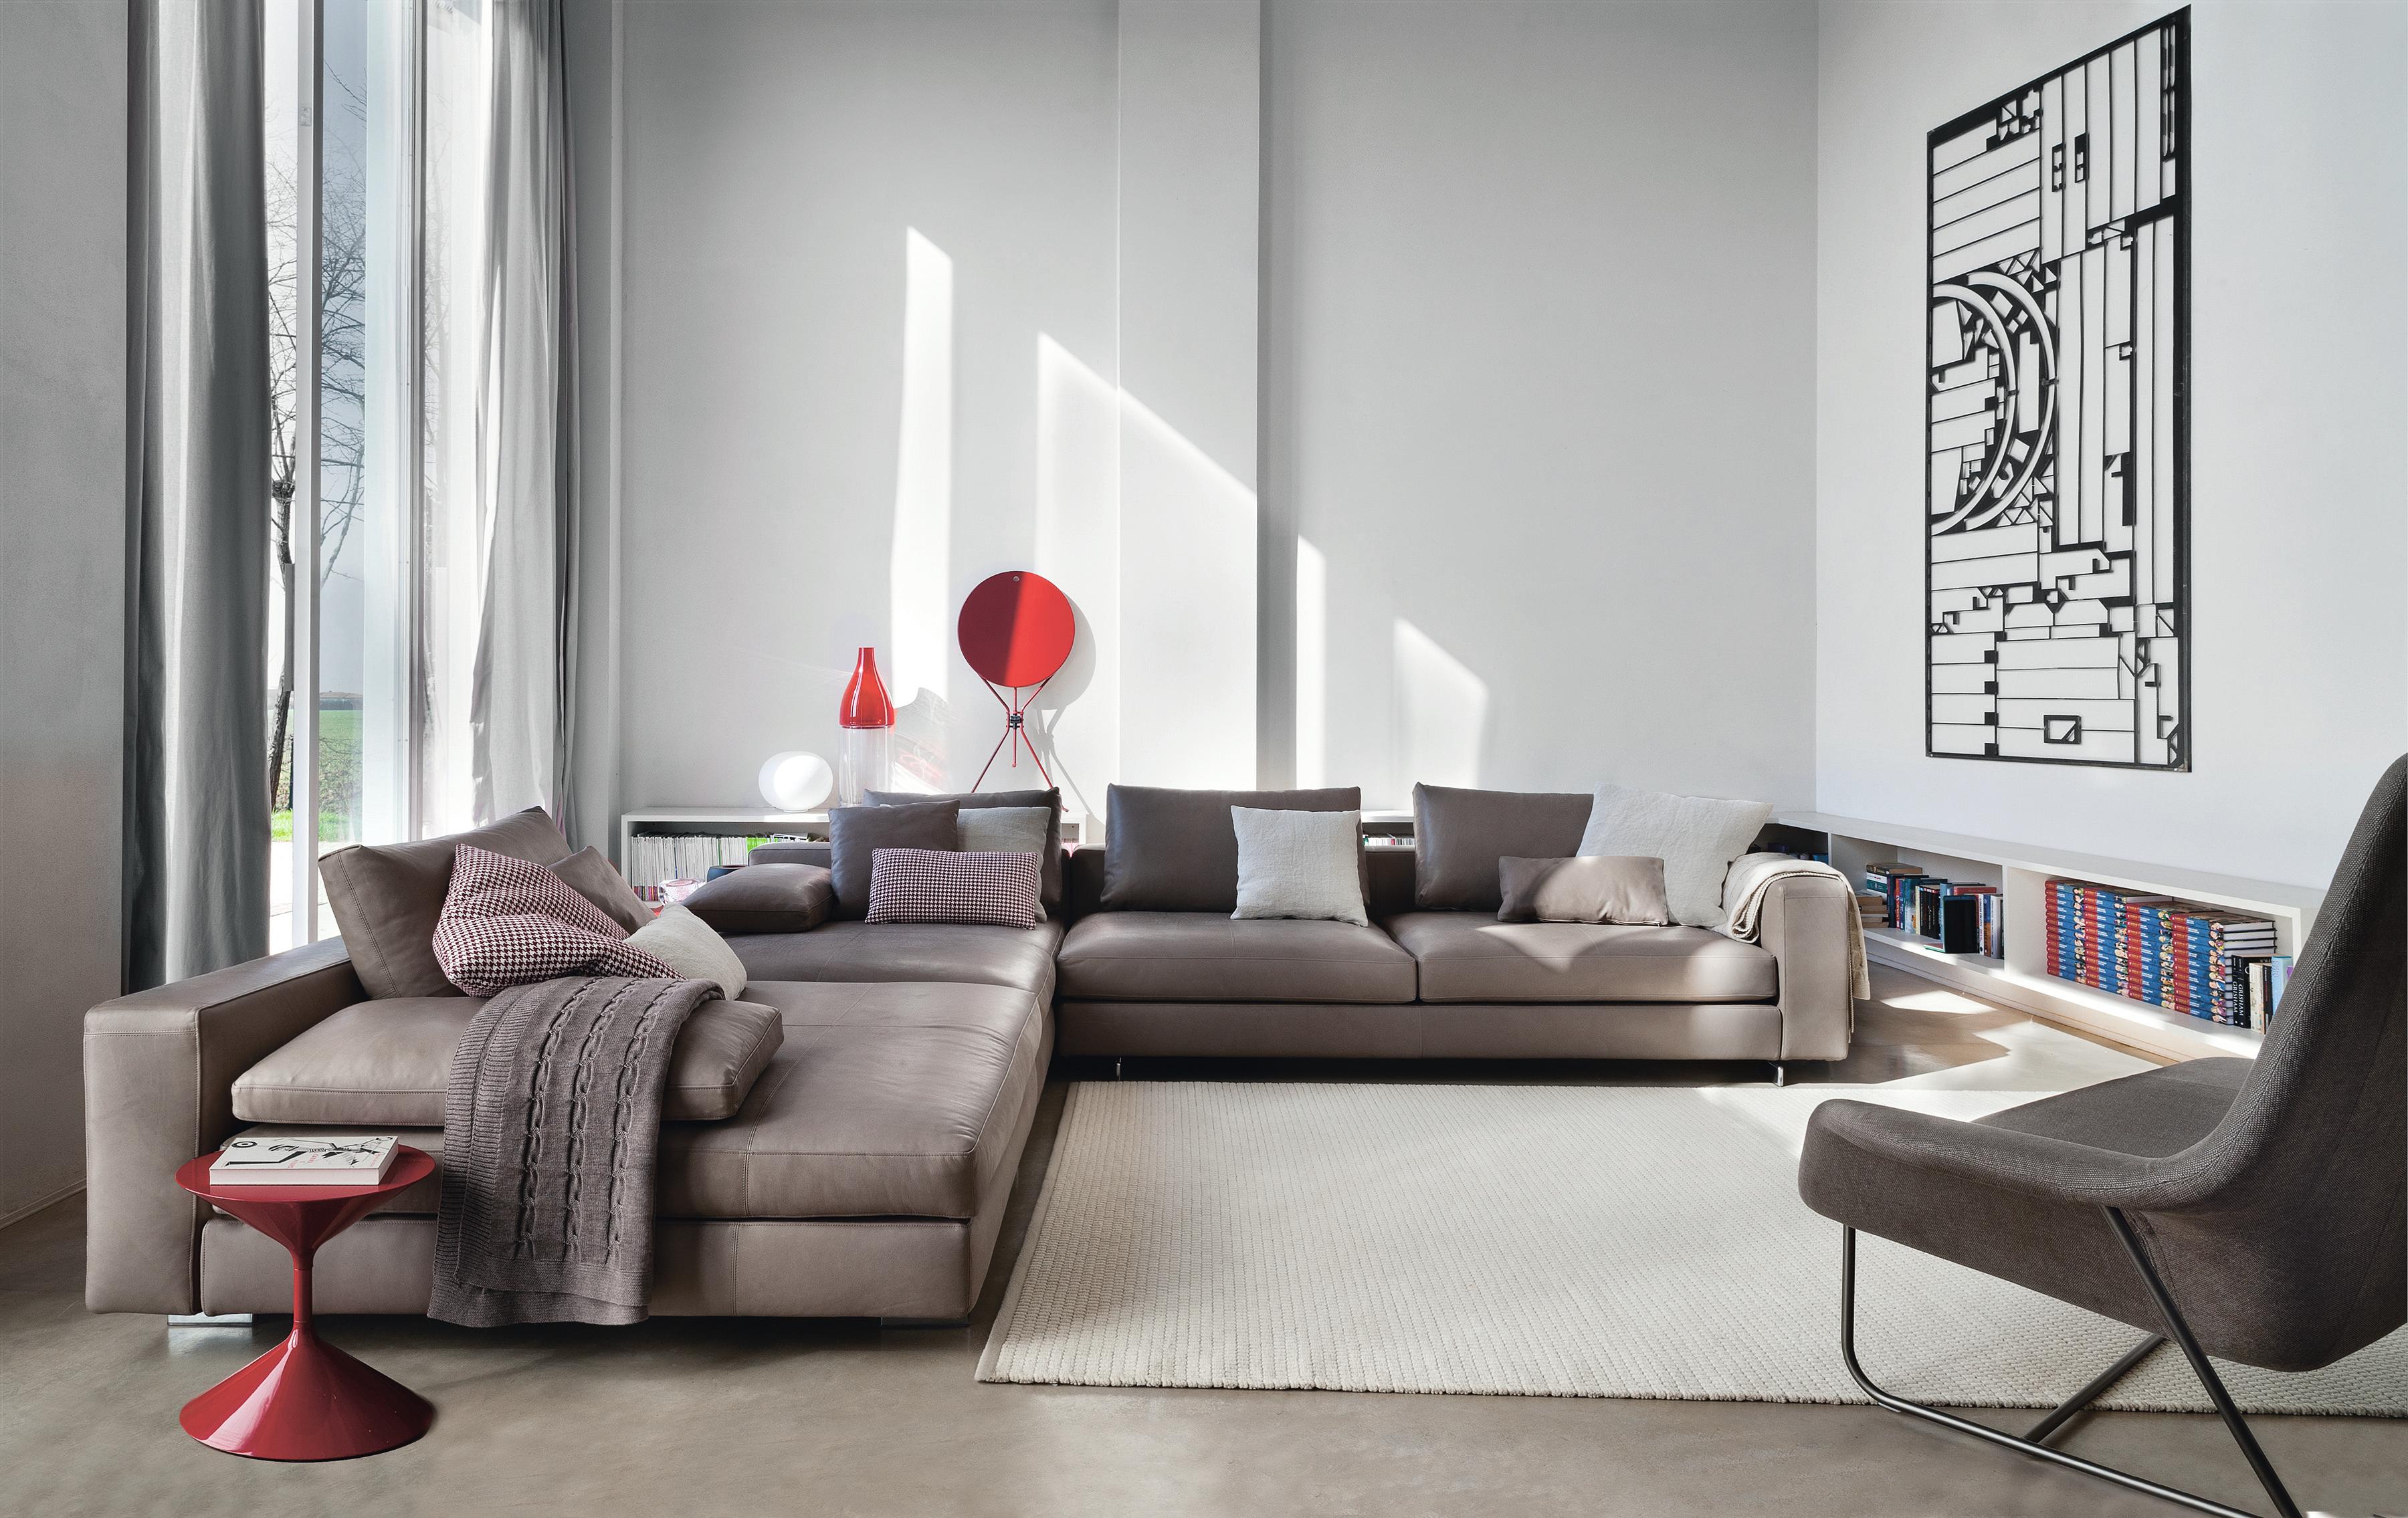 Zanotta Scott Modular Sofa in Vale Grey Upholstery by Ludovica+Roberto Palomba

The range of modular or monobloc sofas allows many corner or straight compositions. 

Additional Information:
Material: Upholstery, aluminum
Frame finish: Polished